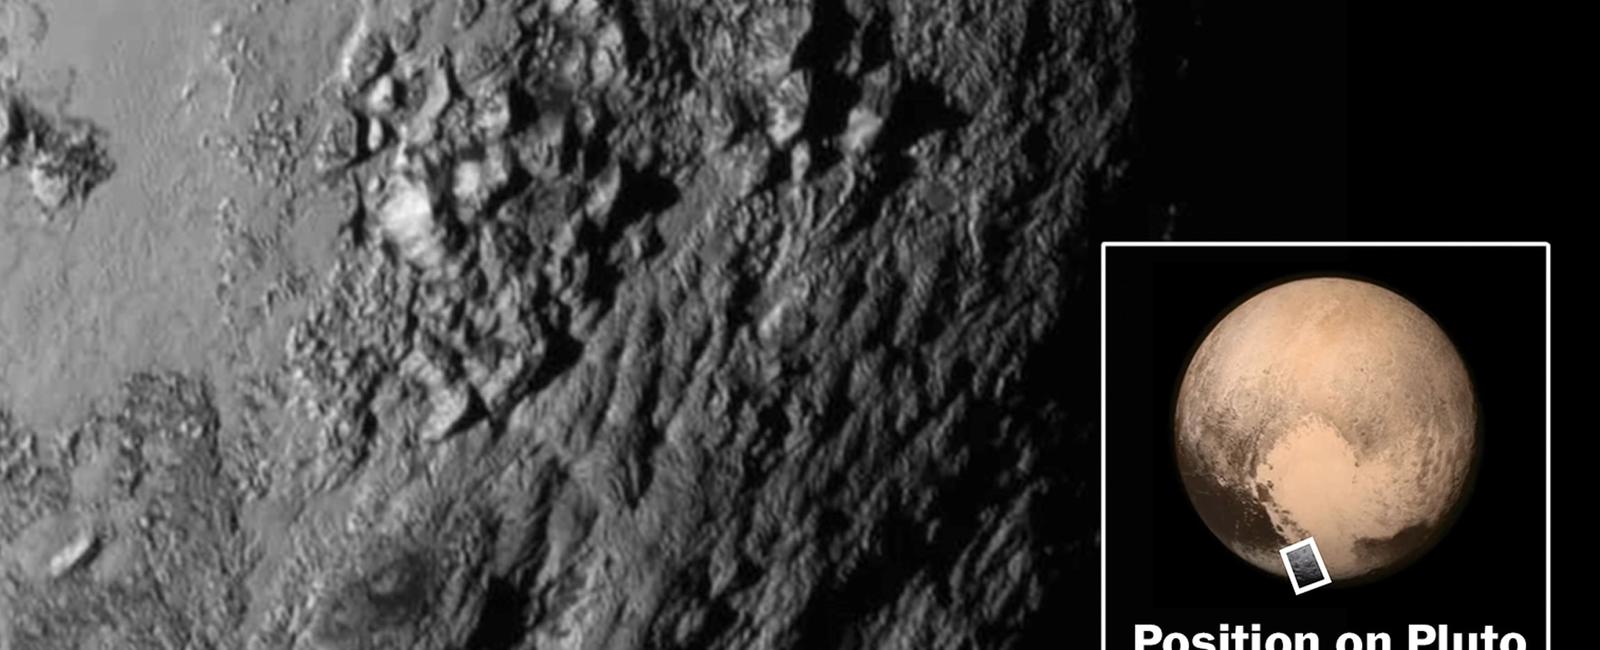 Like earth pluto has craters mountains and valleys its surface temperatures can vary from 375 to 400 degrees fahrenheit 226 to 240 degrees celsius